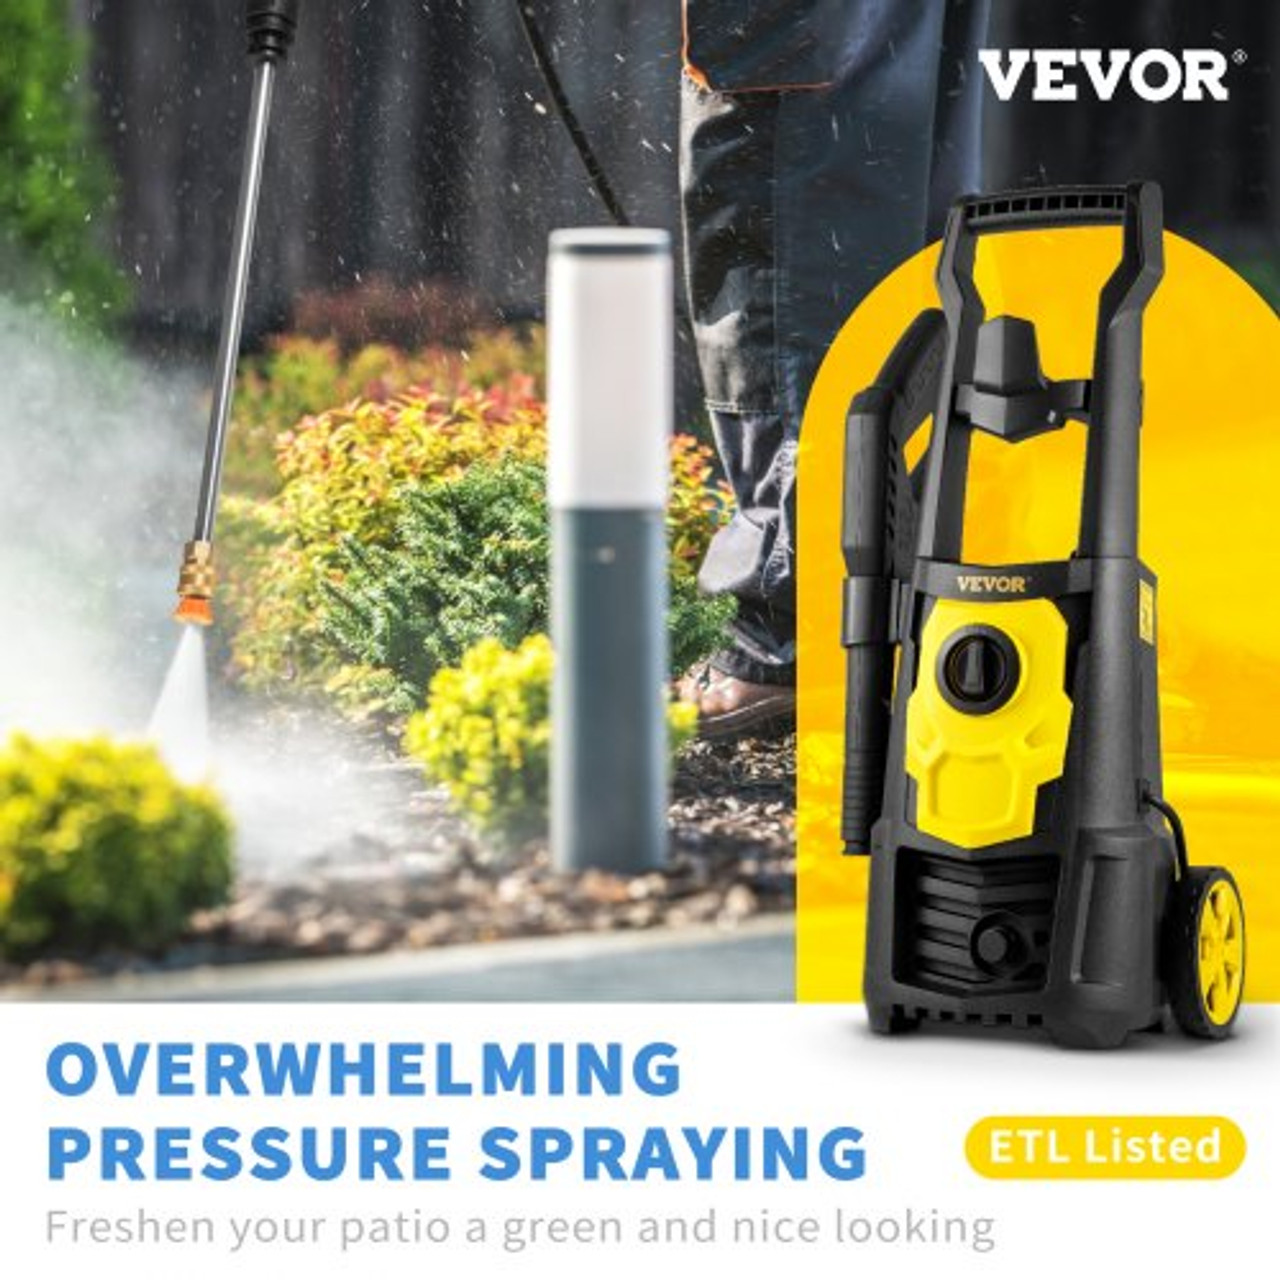 Electric Power Washer, 2000 PSI, Max 1.65 GPM Pressure Washer w/ 30 ft Hose & Reel, 5 Quick Connect Nozzles, Foam Cannon, Portable to Clean Patios, Cars, Fences, Driveways, ETL Listed